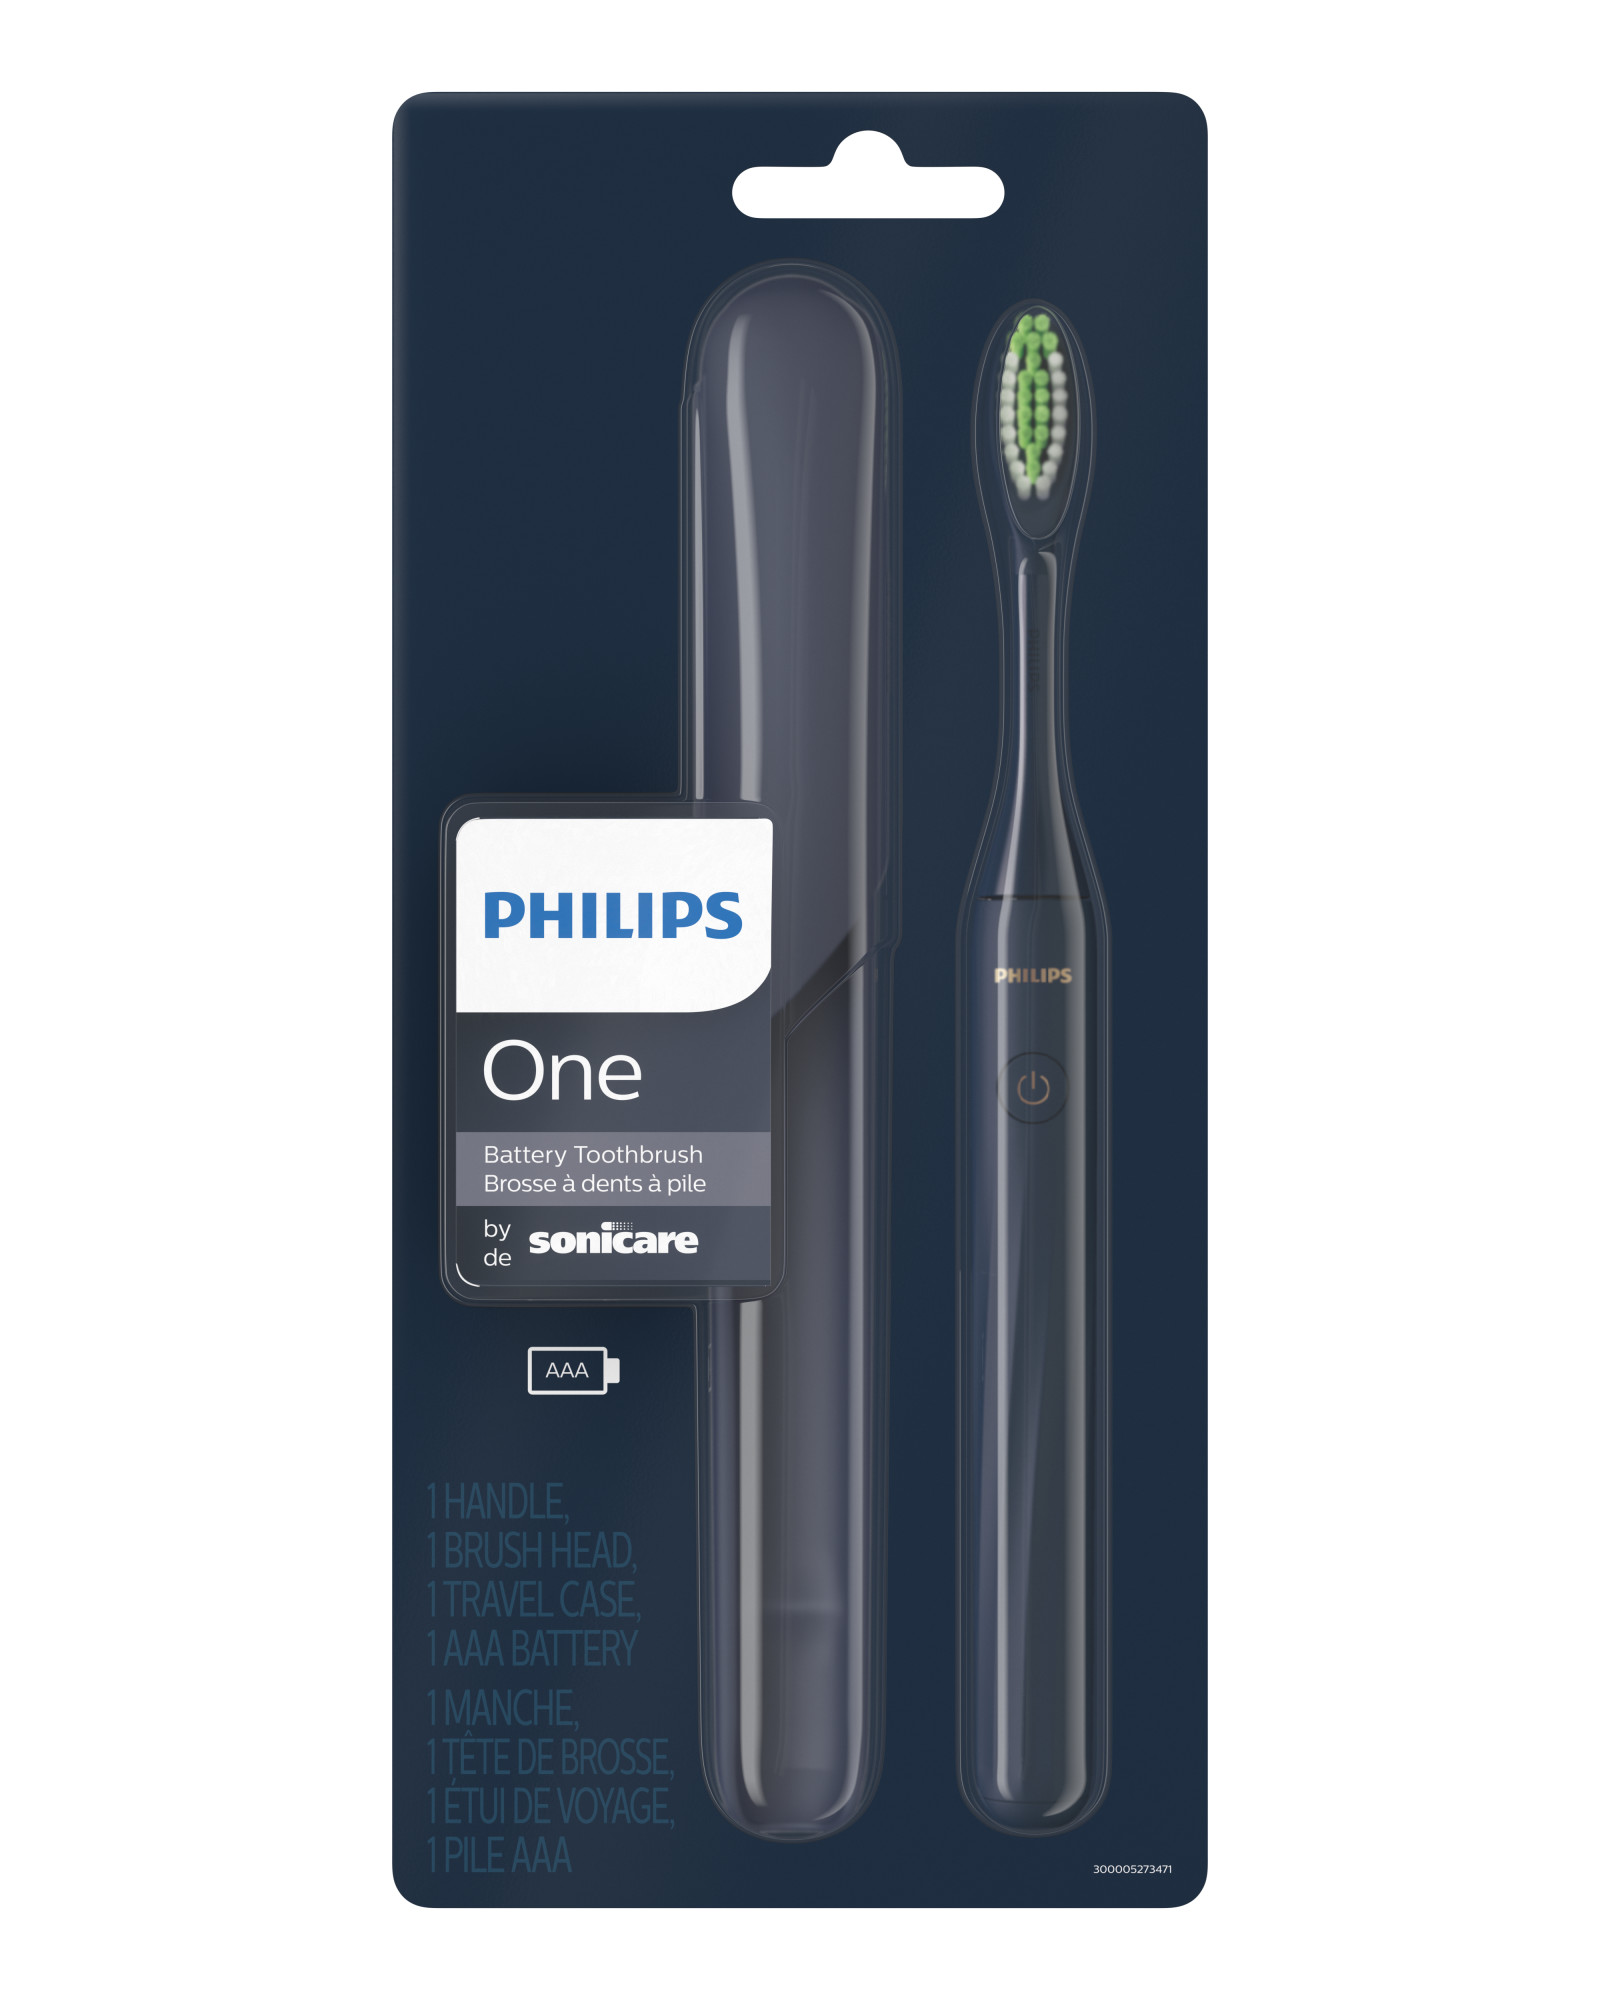 Philips One By Sonicare Battery Toothbrush, Midnight Blue, HY1100/04 - image 3 of 15